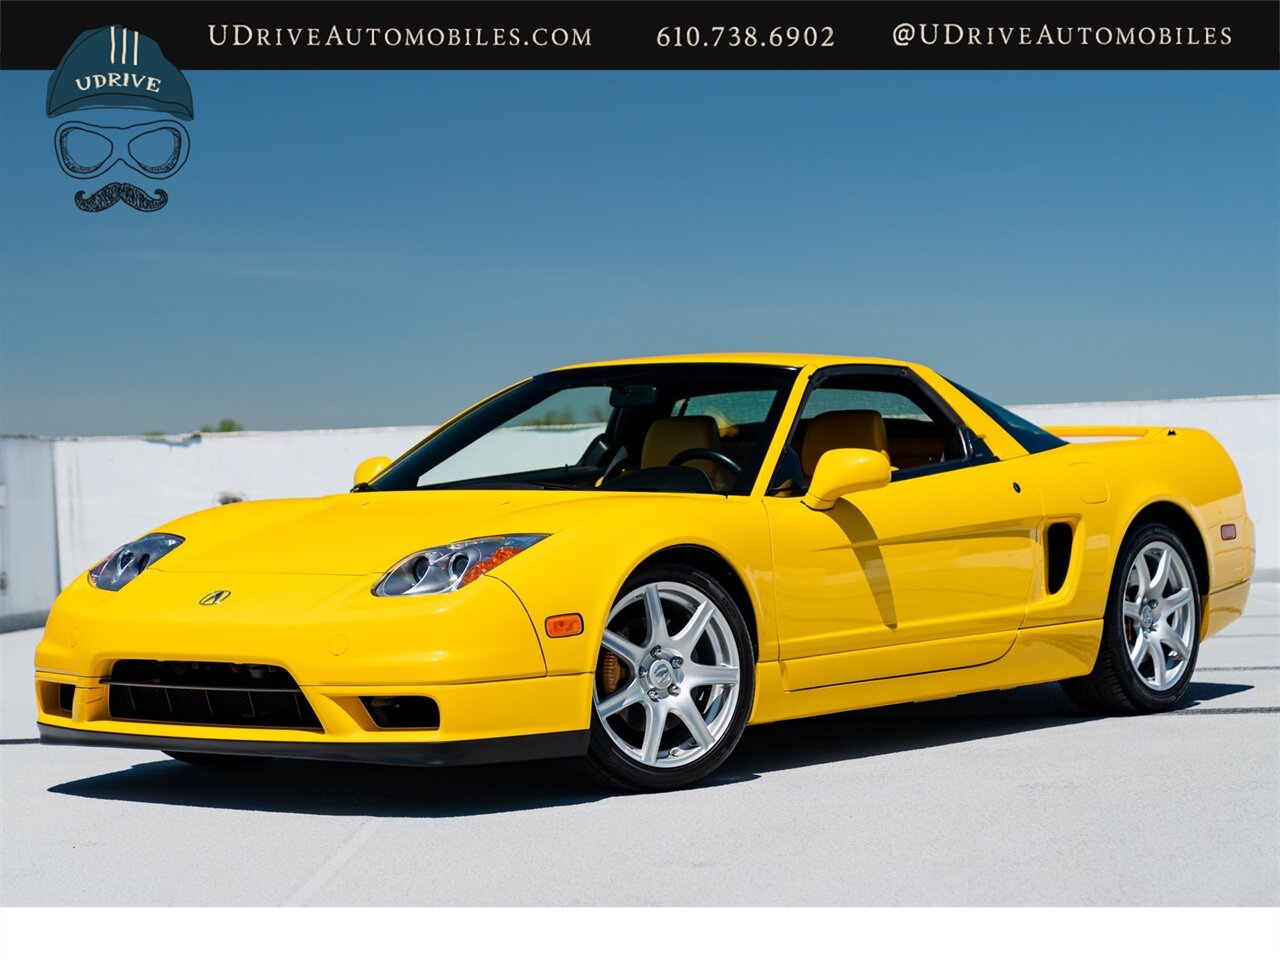 2003 Acura NSX NSX-T  Spa Yellow over Yellow Lthr 1 of 13 Produced - Photo 1 - West Chester, PA 19382